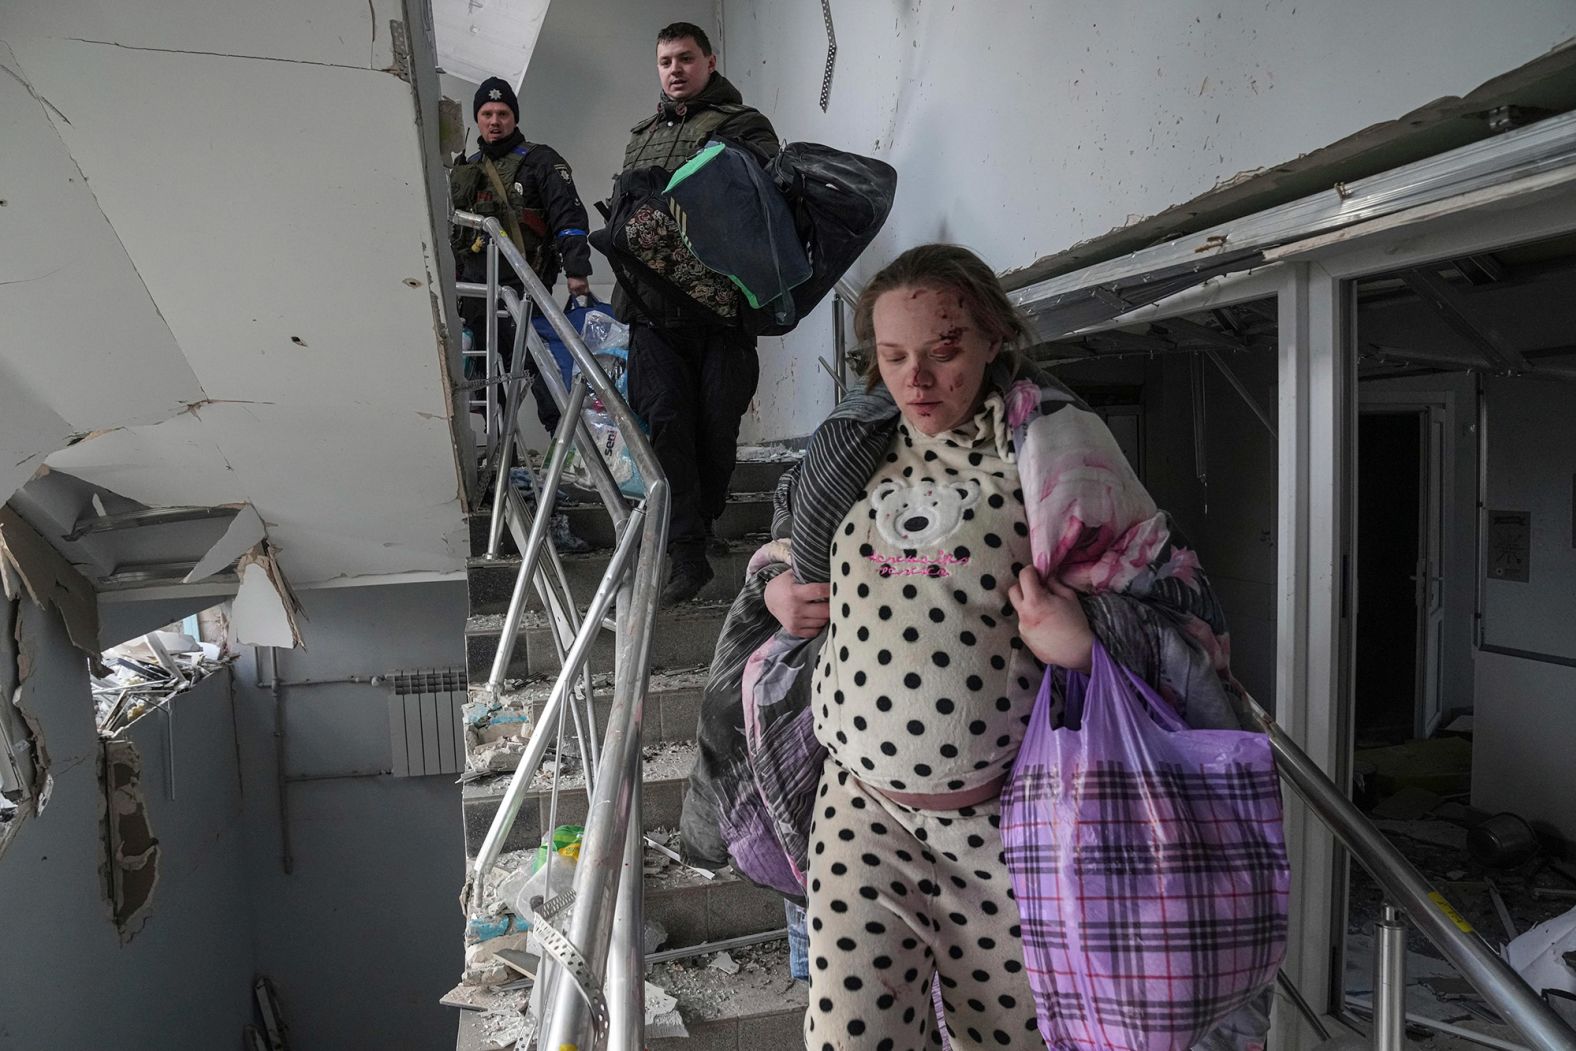 Mariana Vishegirskaya walks downstairs to exit the hospital. She survived the shelling and later <a href="https://www.cnn.com/europe/live-news/ukraine-russia-putin-news-03-11-22/h_5f6a67cbd30d09e530b4244d9343f1cd" target="_blank">delivered a baby girl</a> in another hospital.